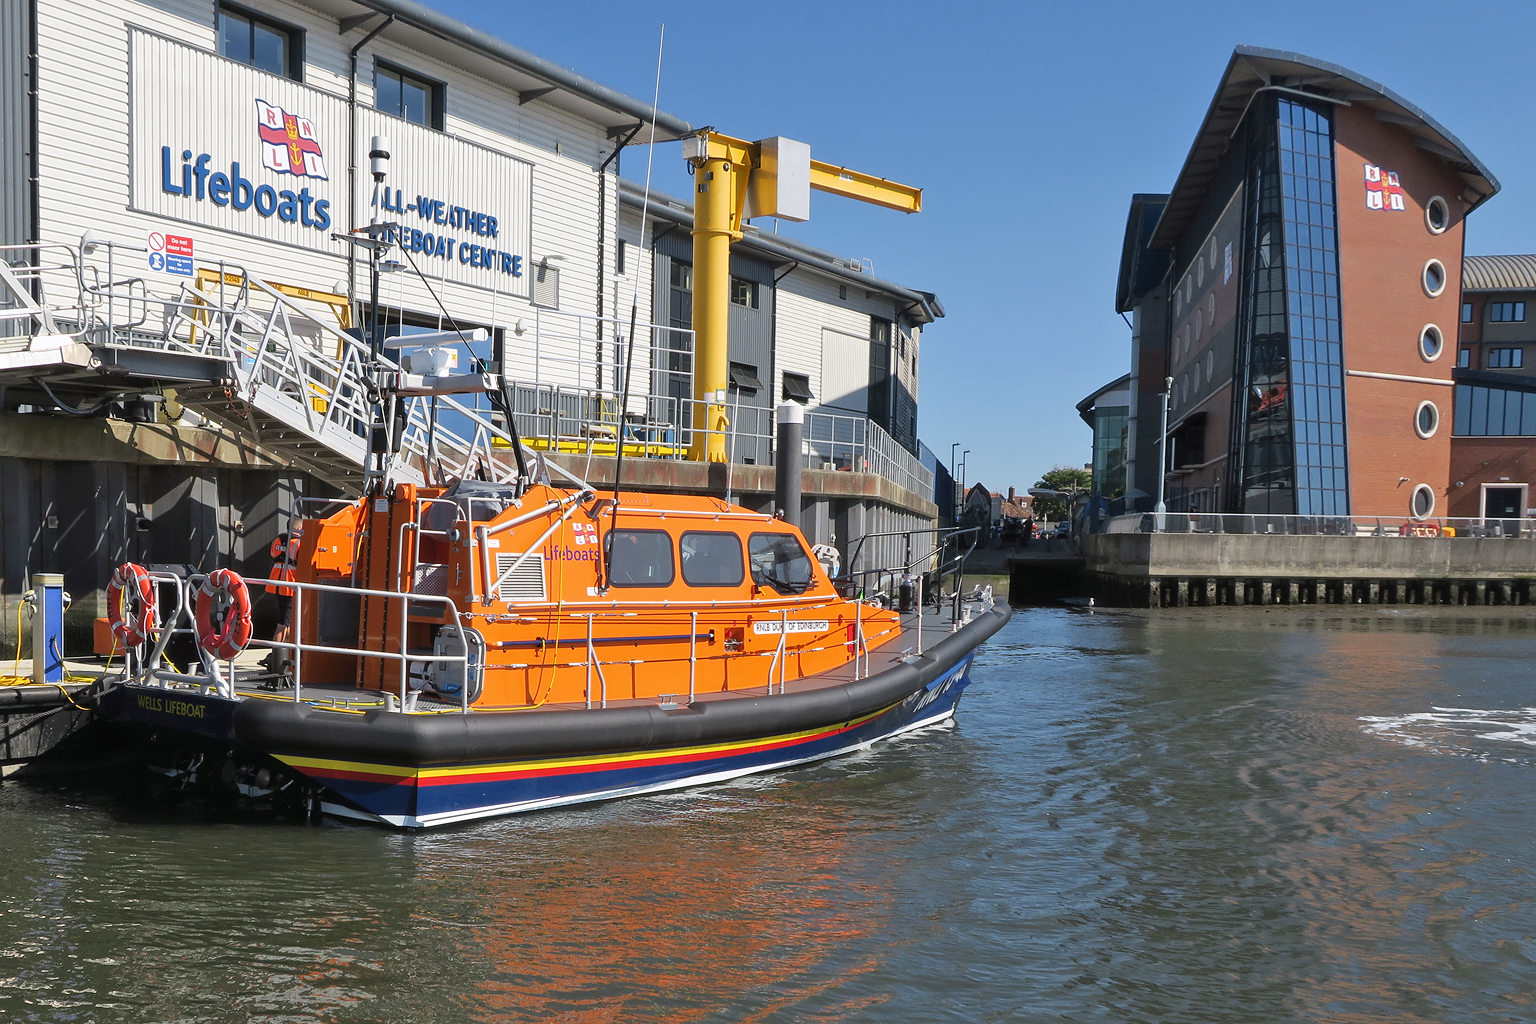 13-46 'Duke of Edinburgh' during commissioning trials at the All-Weather Lifeboat Centre in Poole